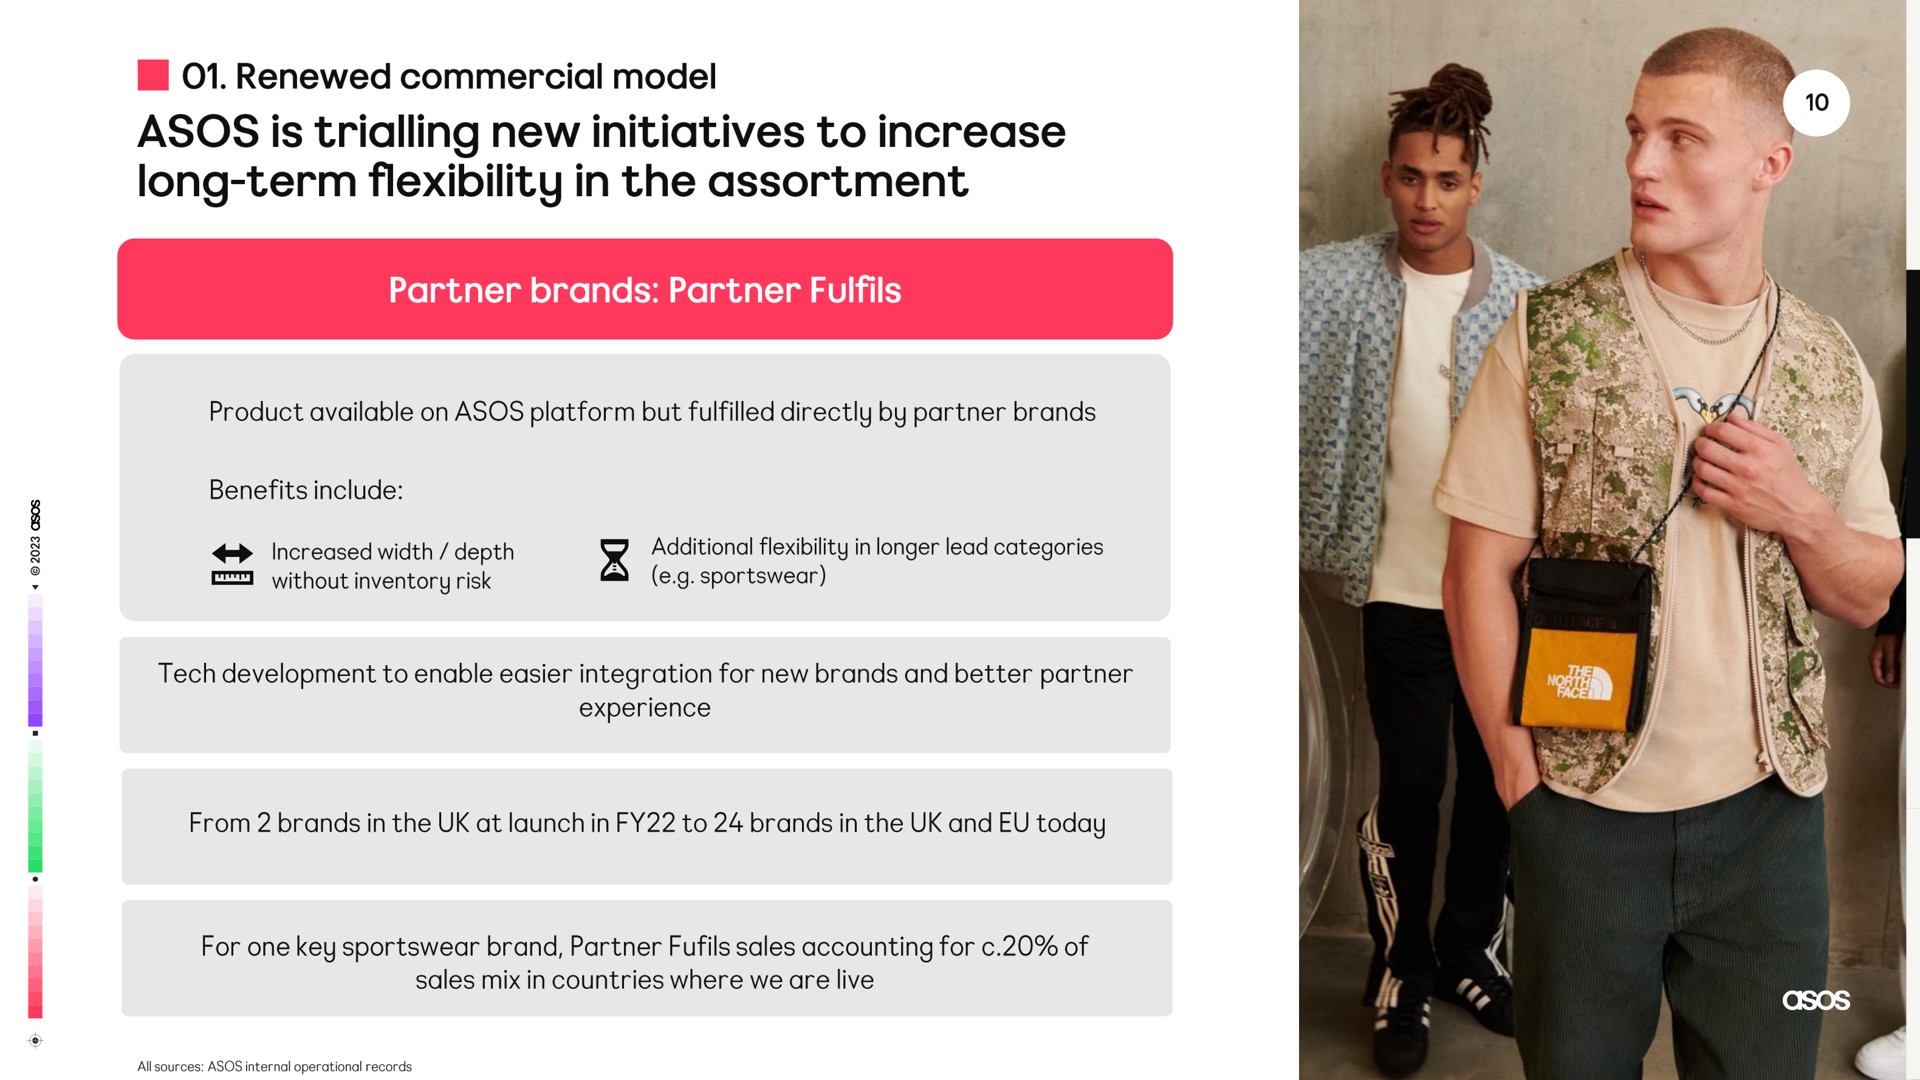 is new initiatives to increase long term flexibility in the assortment | Asos